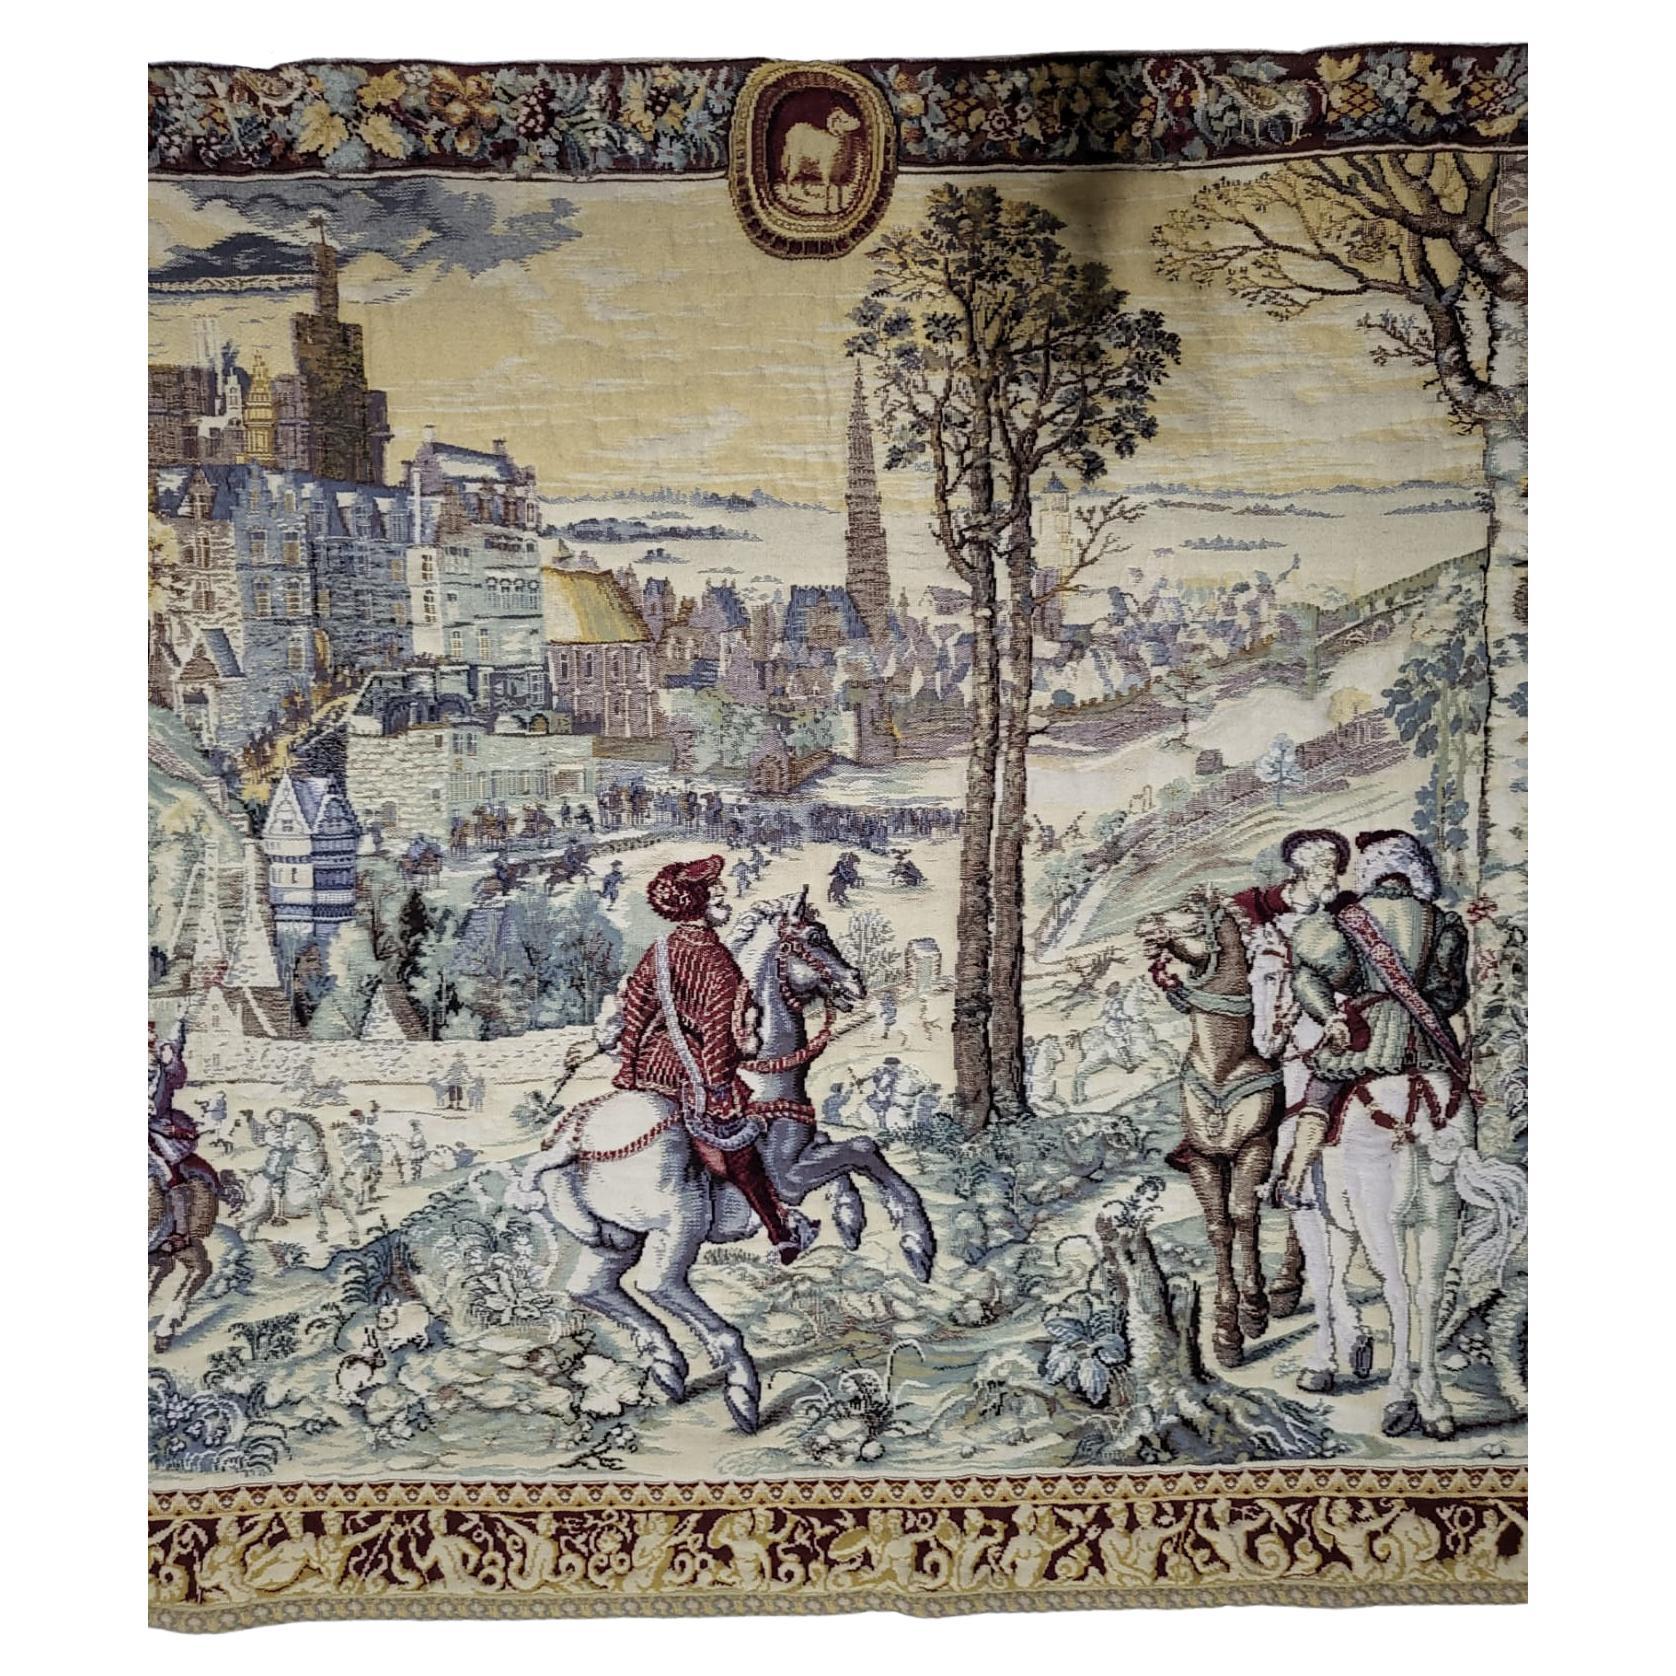 Very big dimension wool Tapestry representing the Royal Hunt of Maximilian. 
Made in a mecanic jacquard style. The original one is in the Louvre Museum in Paris.
In a very good condition, it has fixation rings all over its back part which makes